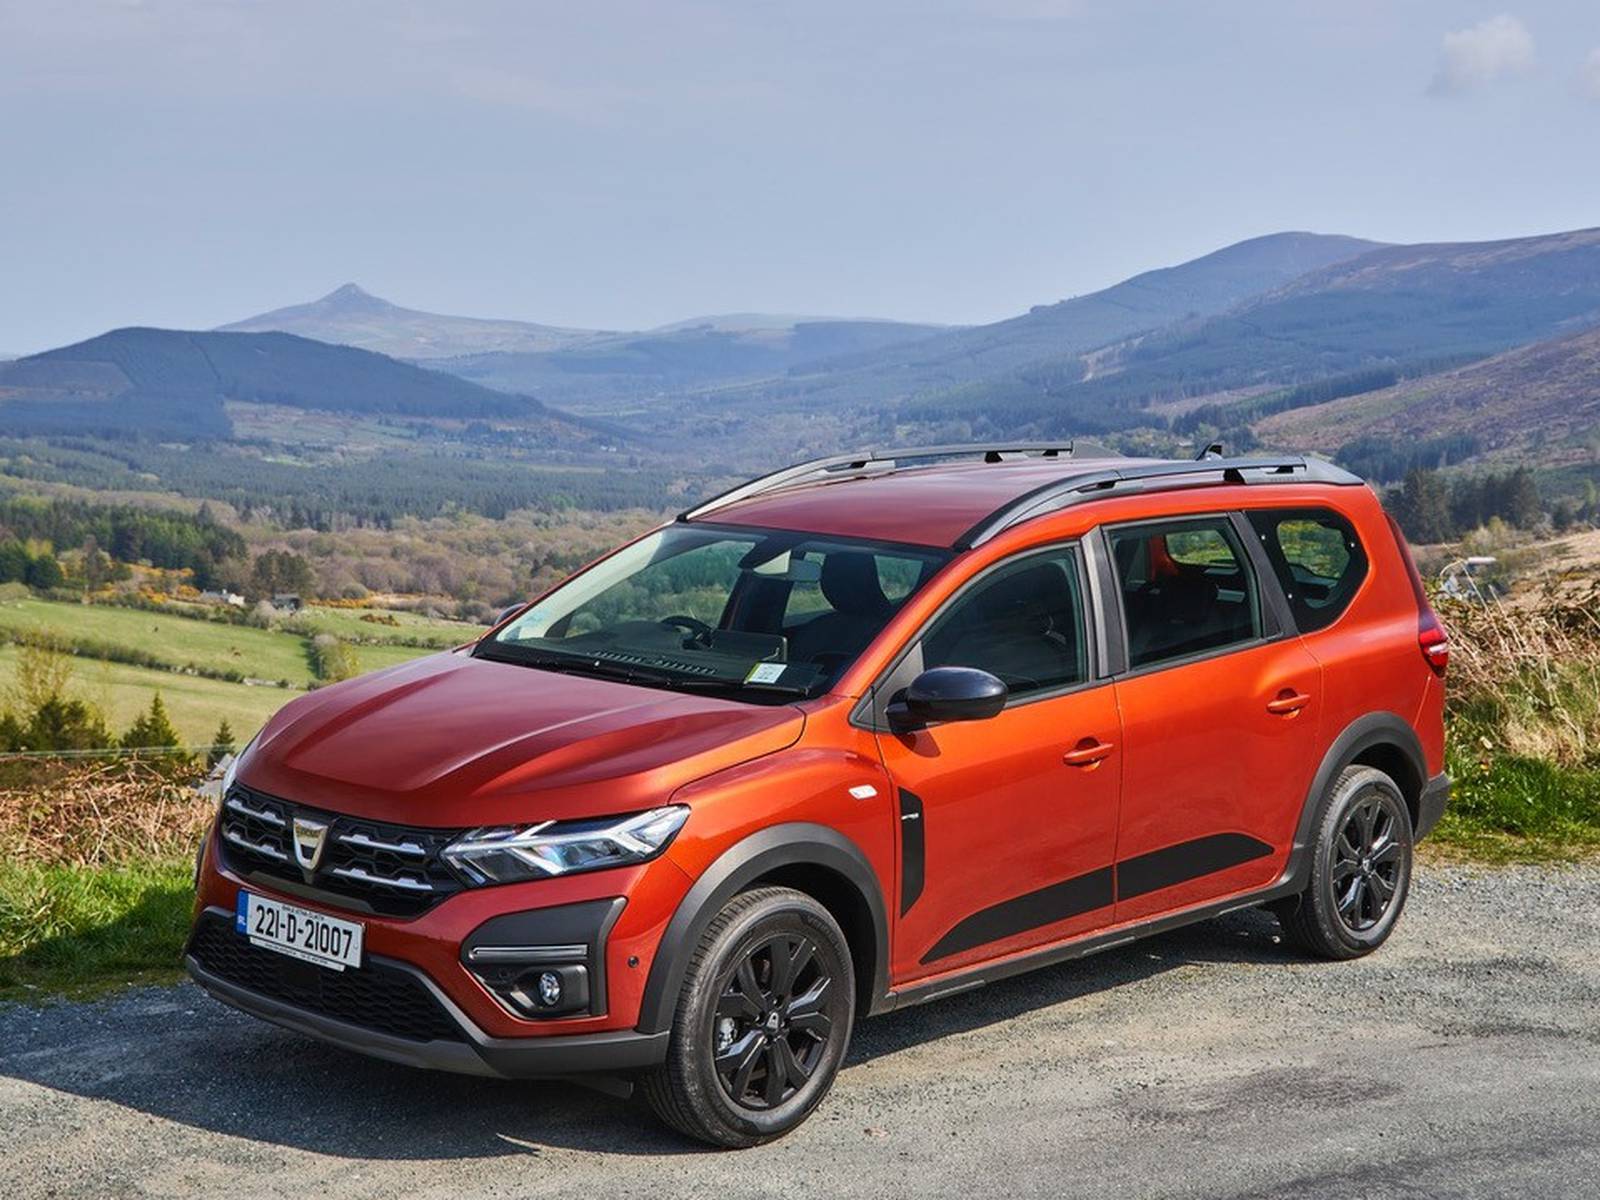 Dacia Jogger: Seven-seat SUV coming from budget Renault brand